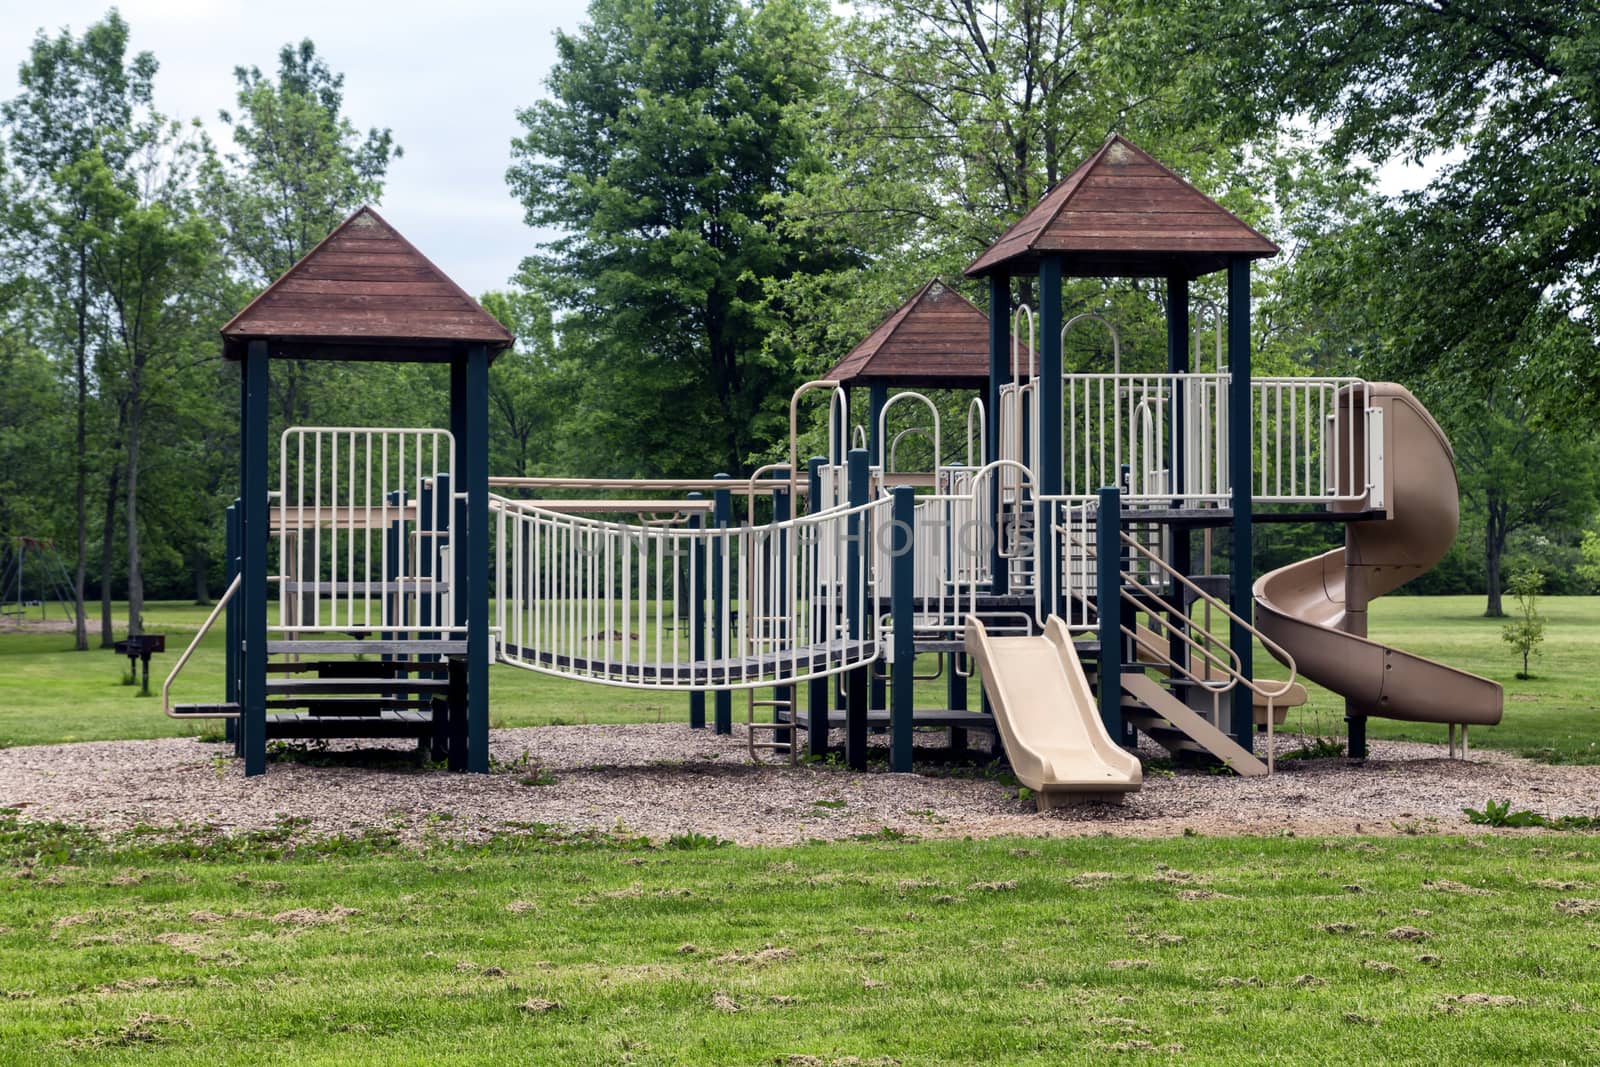 Large green and beige playground. Roofed stuctures, slides, and railed bridges.